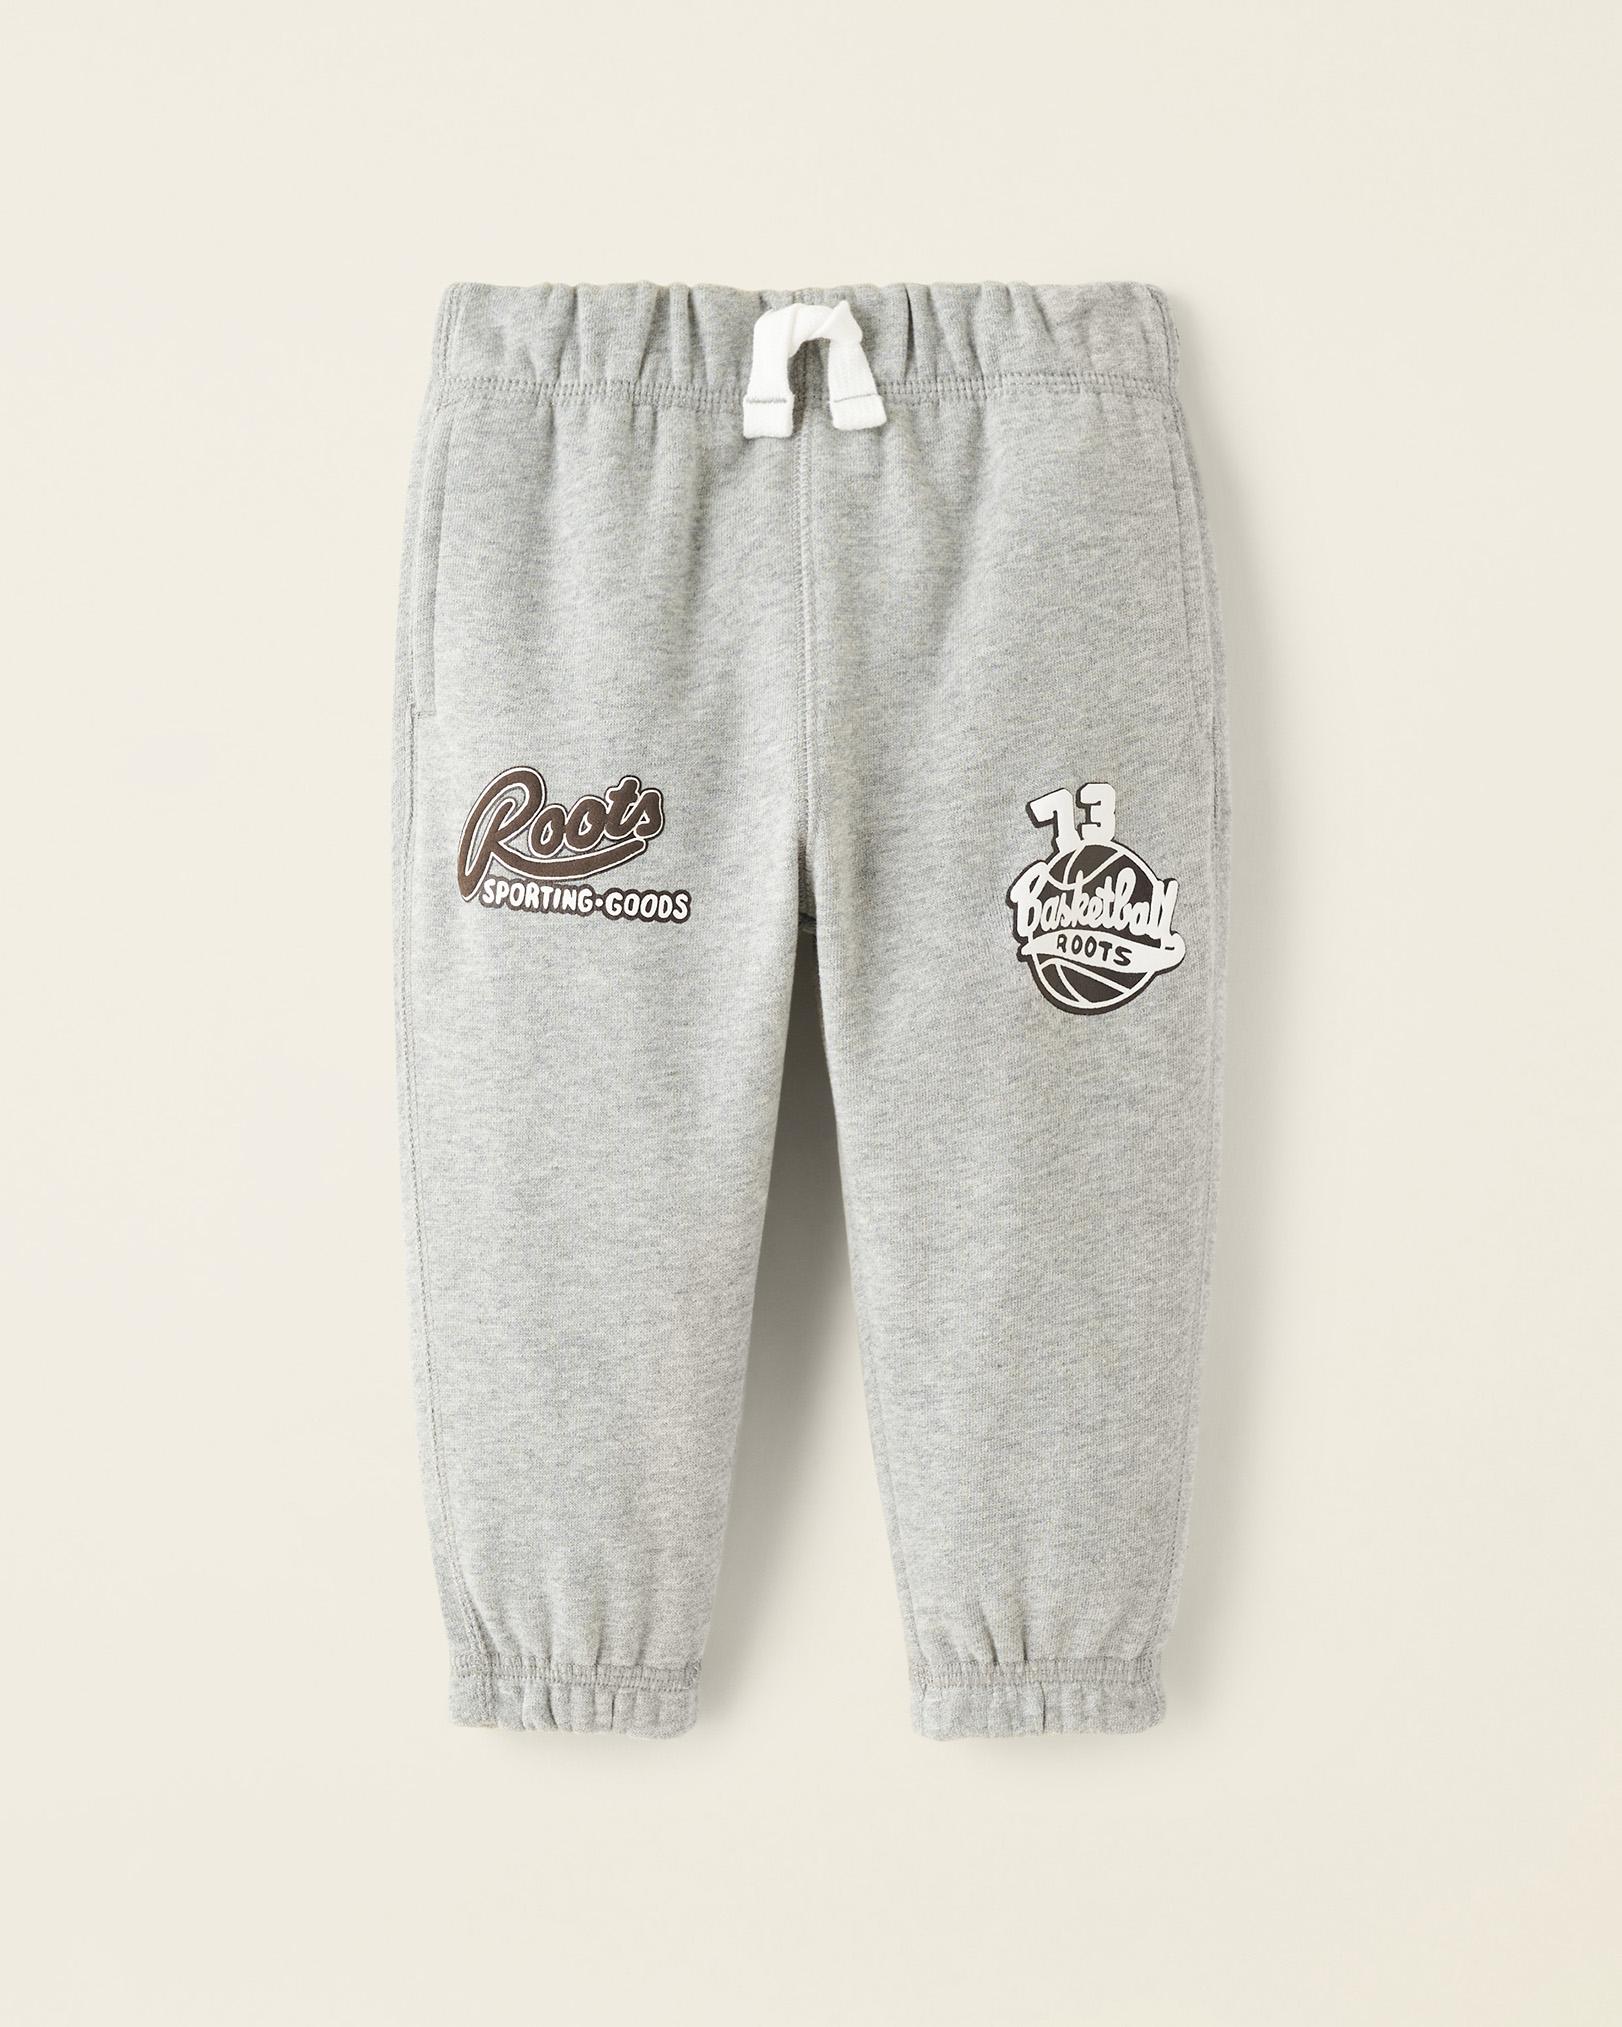 Roots Baby Sporting Goods Patch Sweatpant in Grey Mix